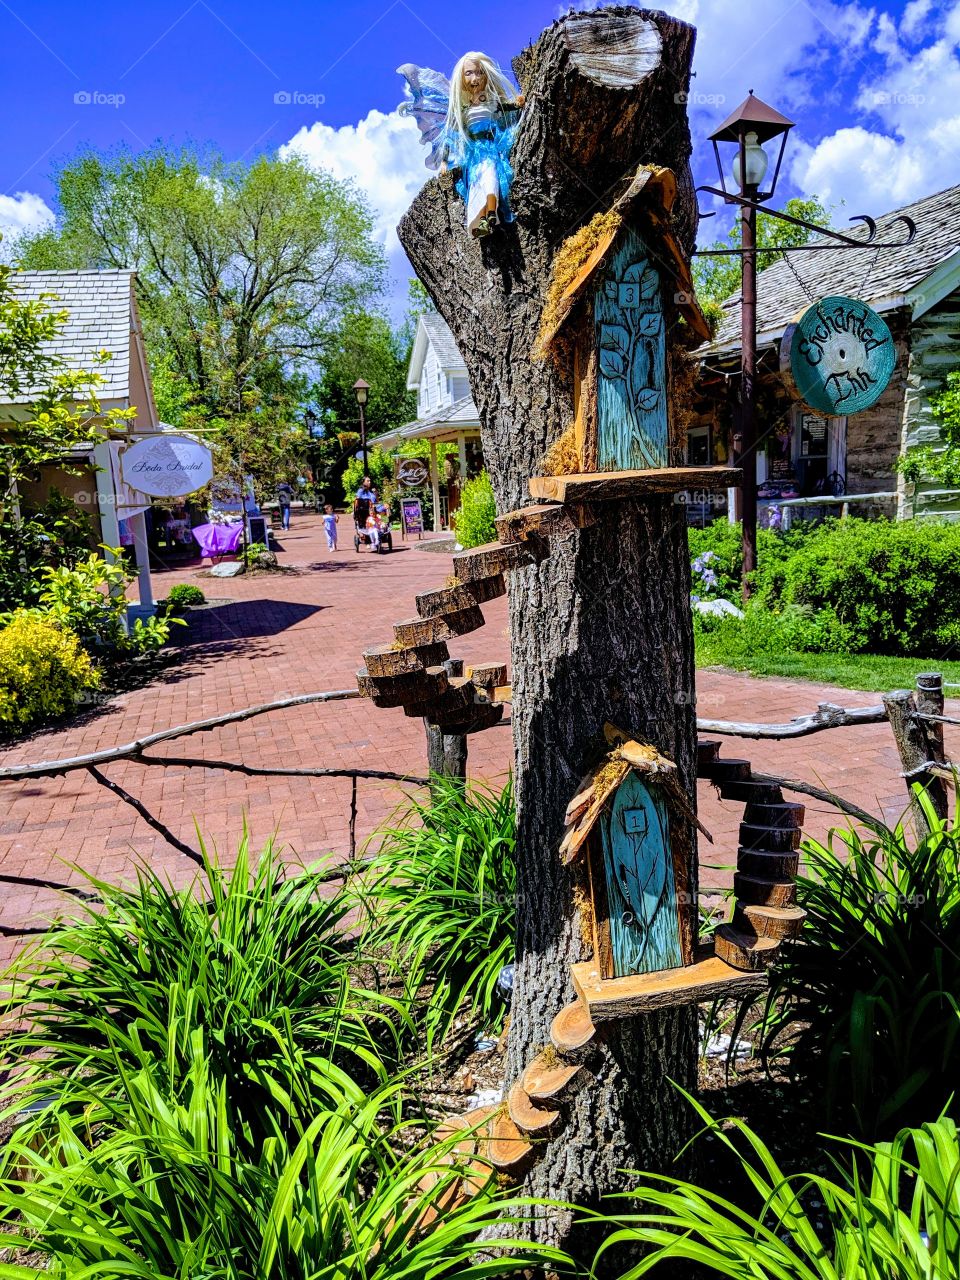 Fairy and Pixie Quest at Gardner Village in West Jordan, Utah. ©️ Copyright CM Photography May 2019.